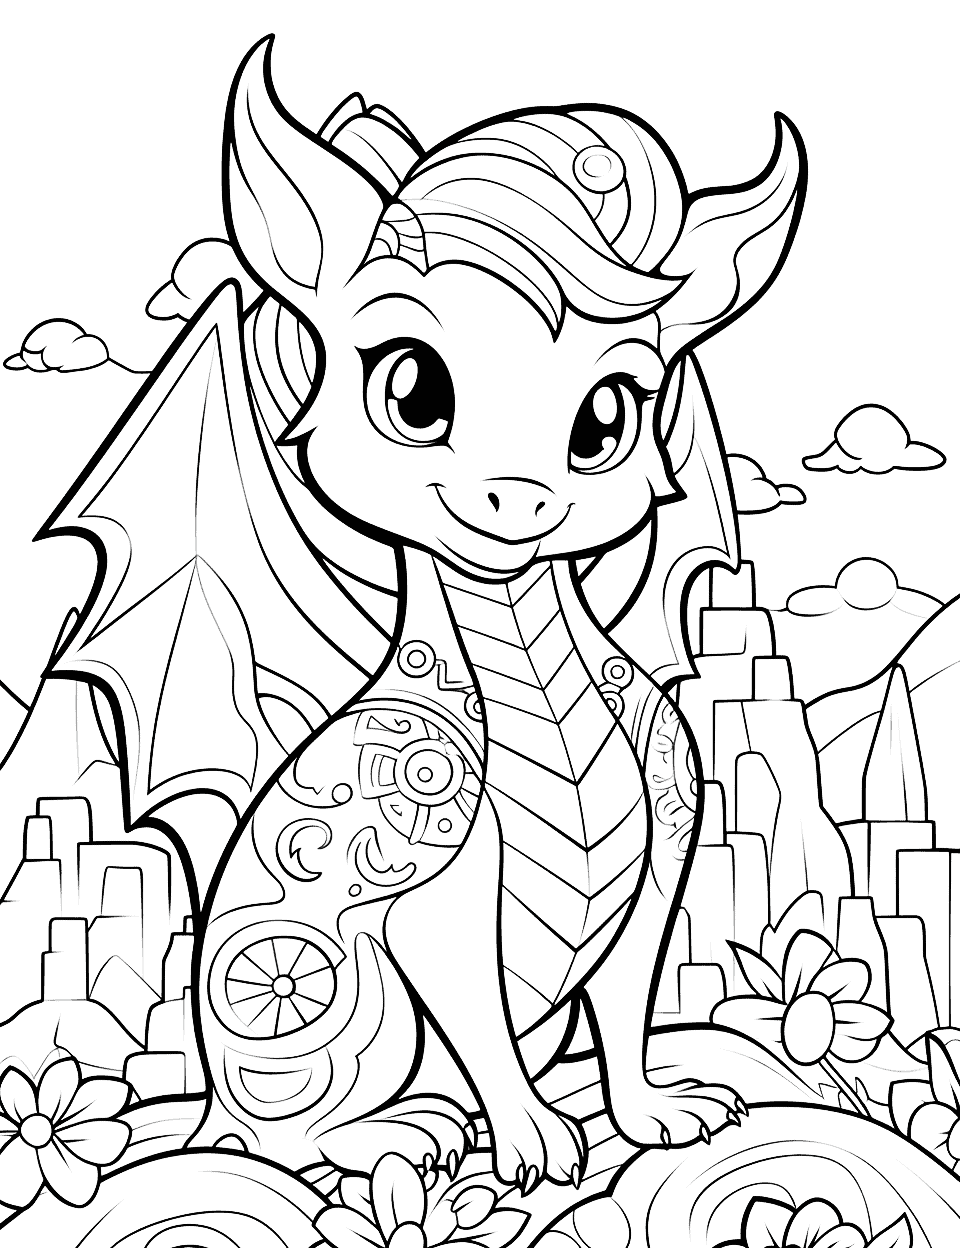 Dragon's Kawaii Adventure Adult Coloring Page - A dragon on an adventure surrounded by tiny landscapes.